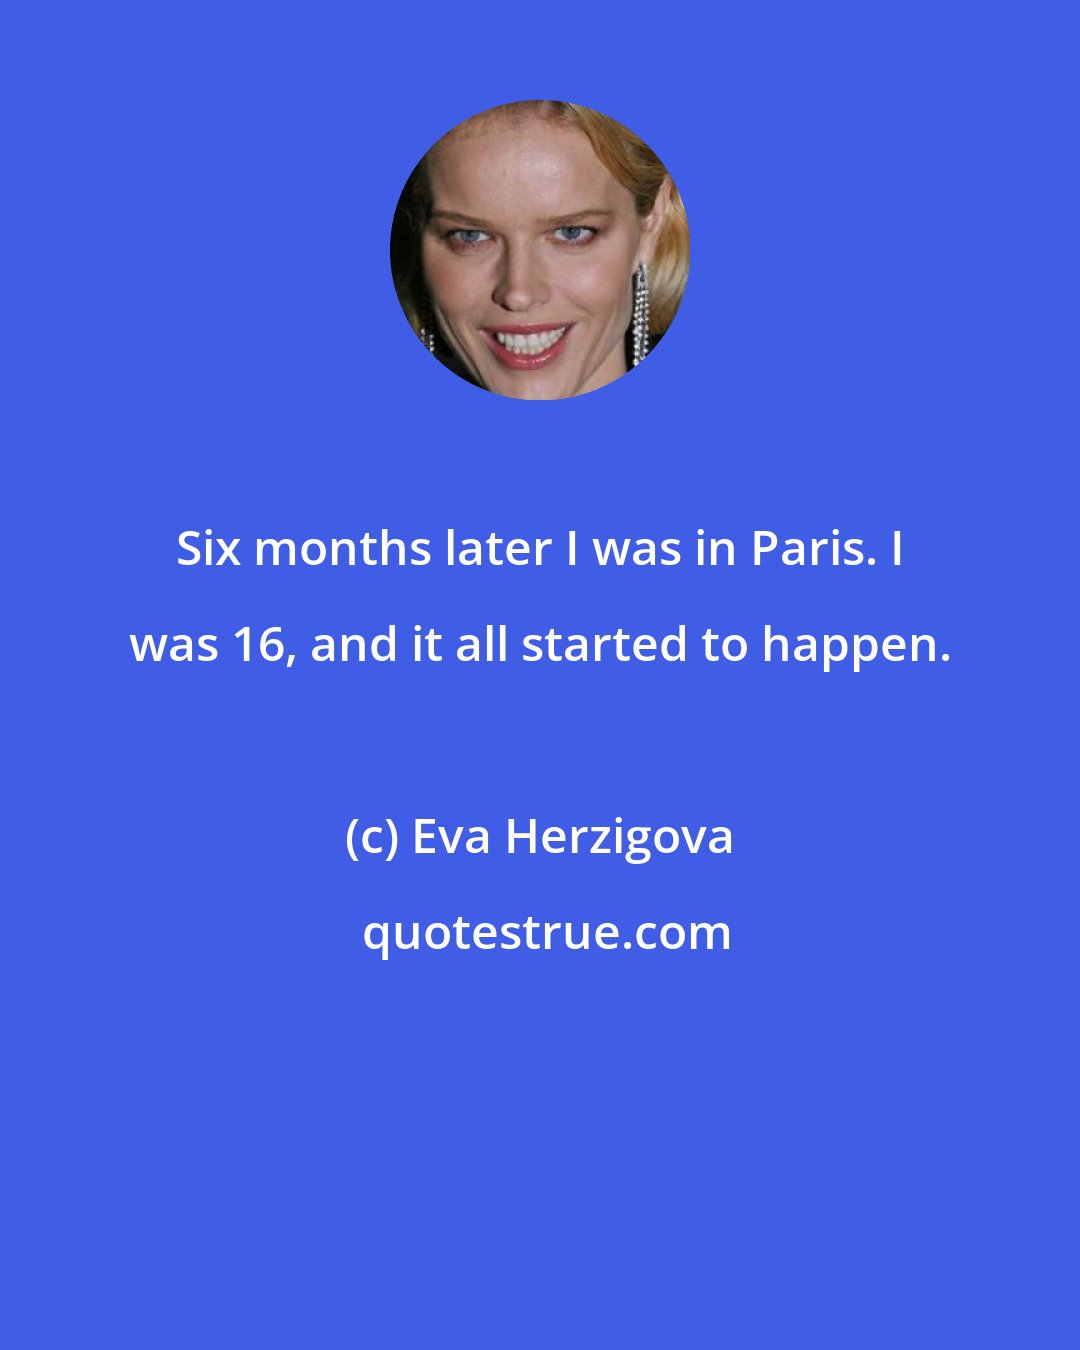 Eva Herzigova: Six months later I was in Paris. I was 16, and it all started to happen.